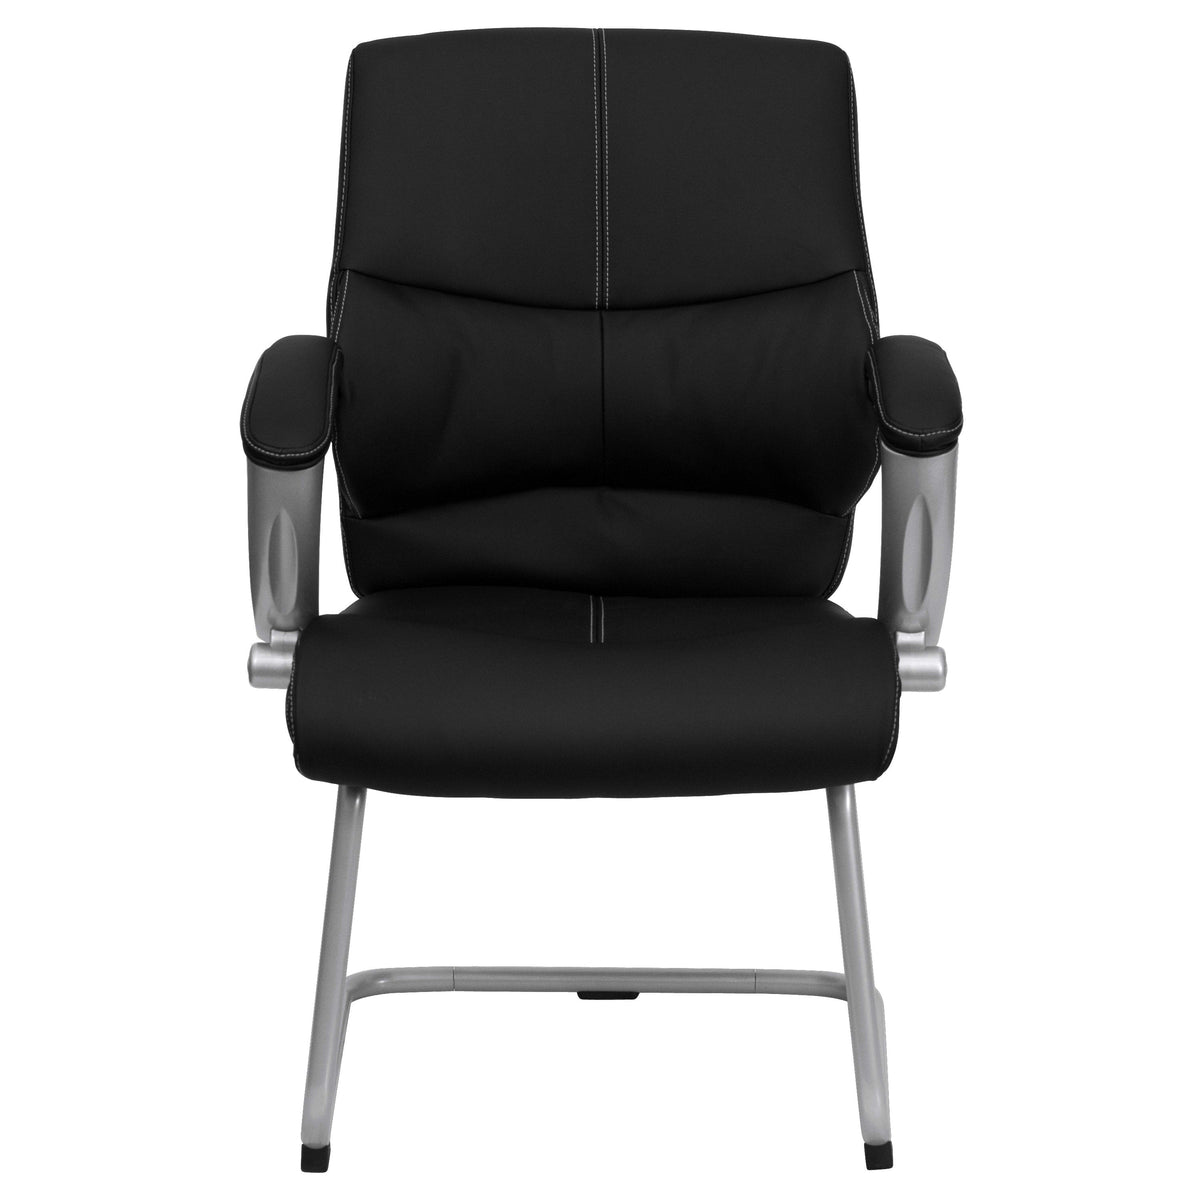 Black LeatherSoft Executive Side Reception Chair with Silver Sled Base